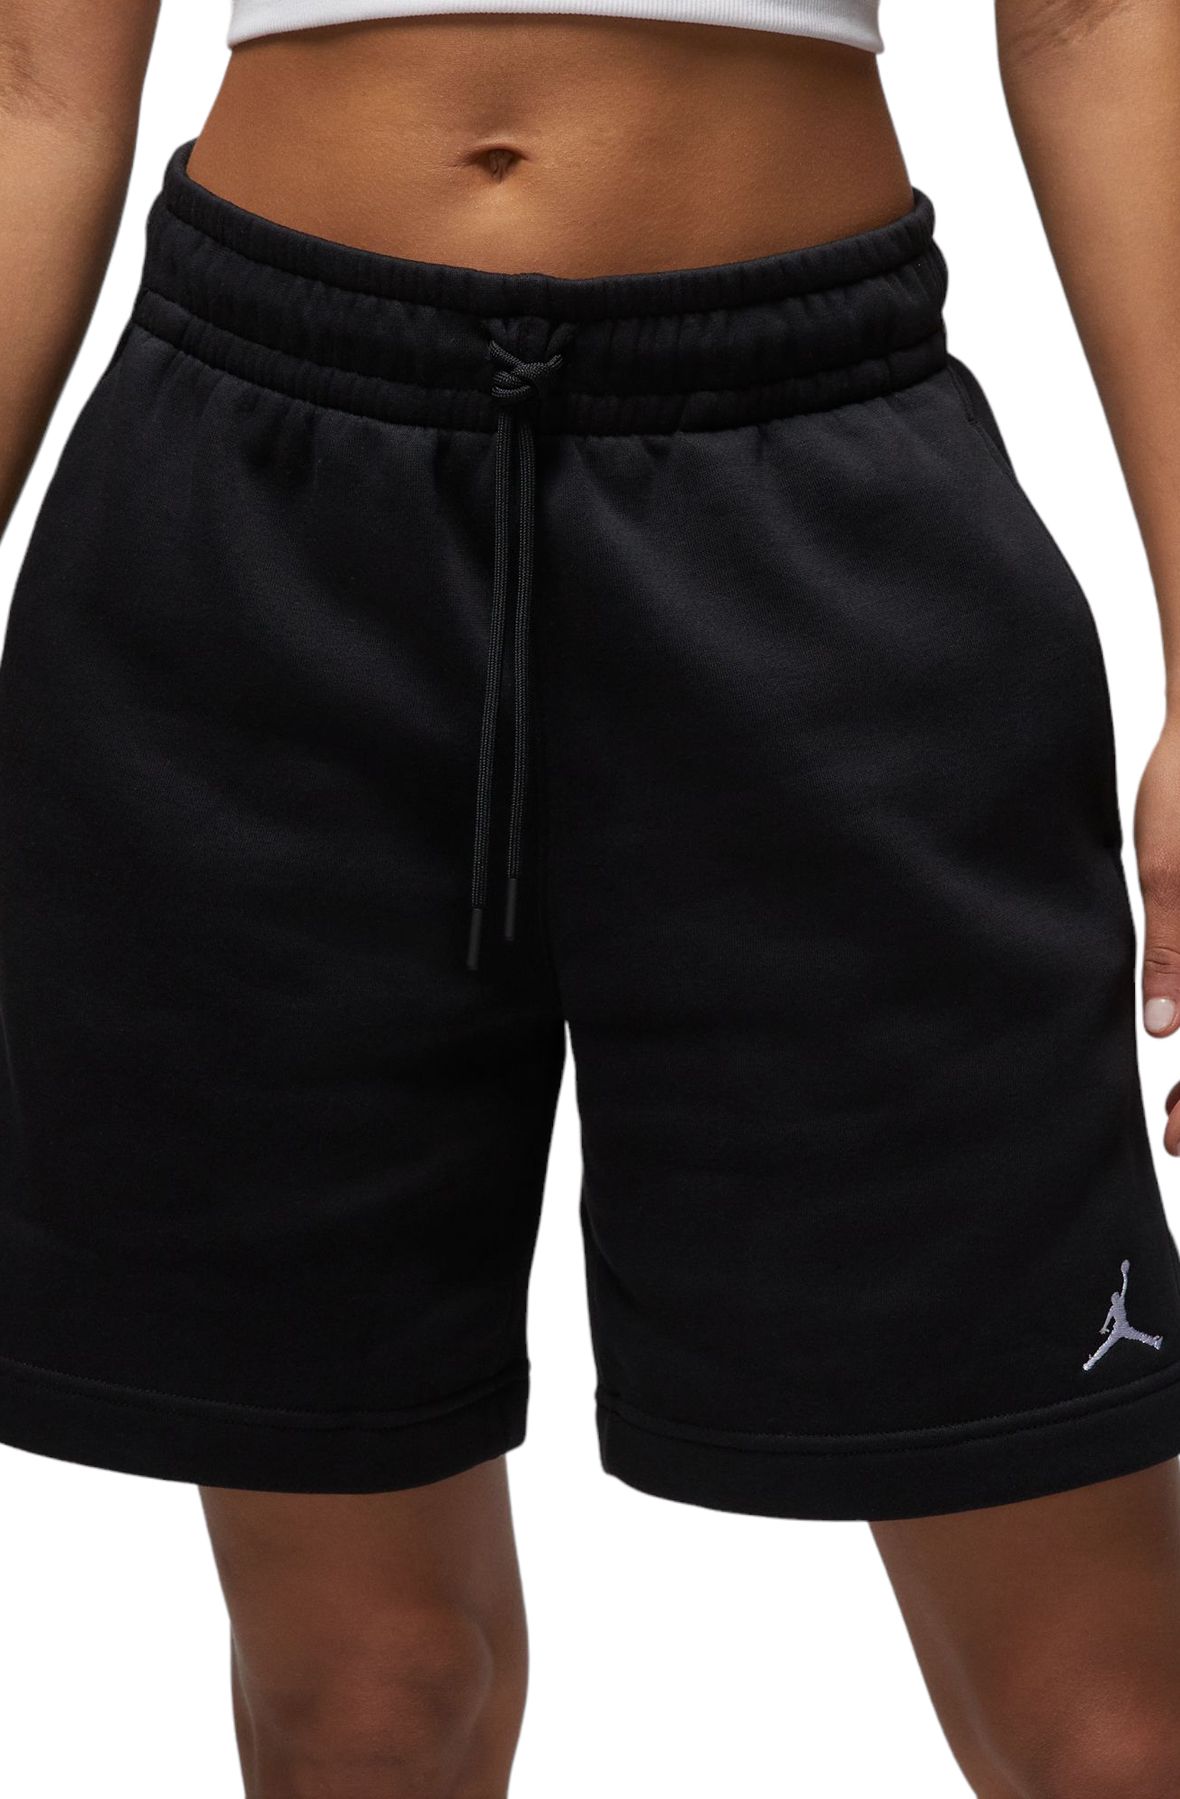 Summer Mens Shorts Los Angeles Striped Athletic Basketball Drawstring Shorts, Today's Best Daily Deals